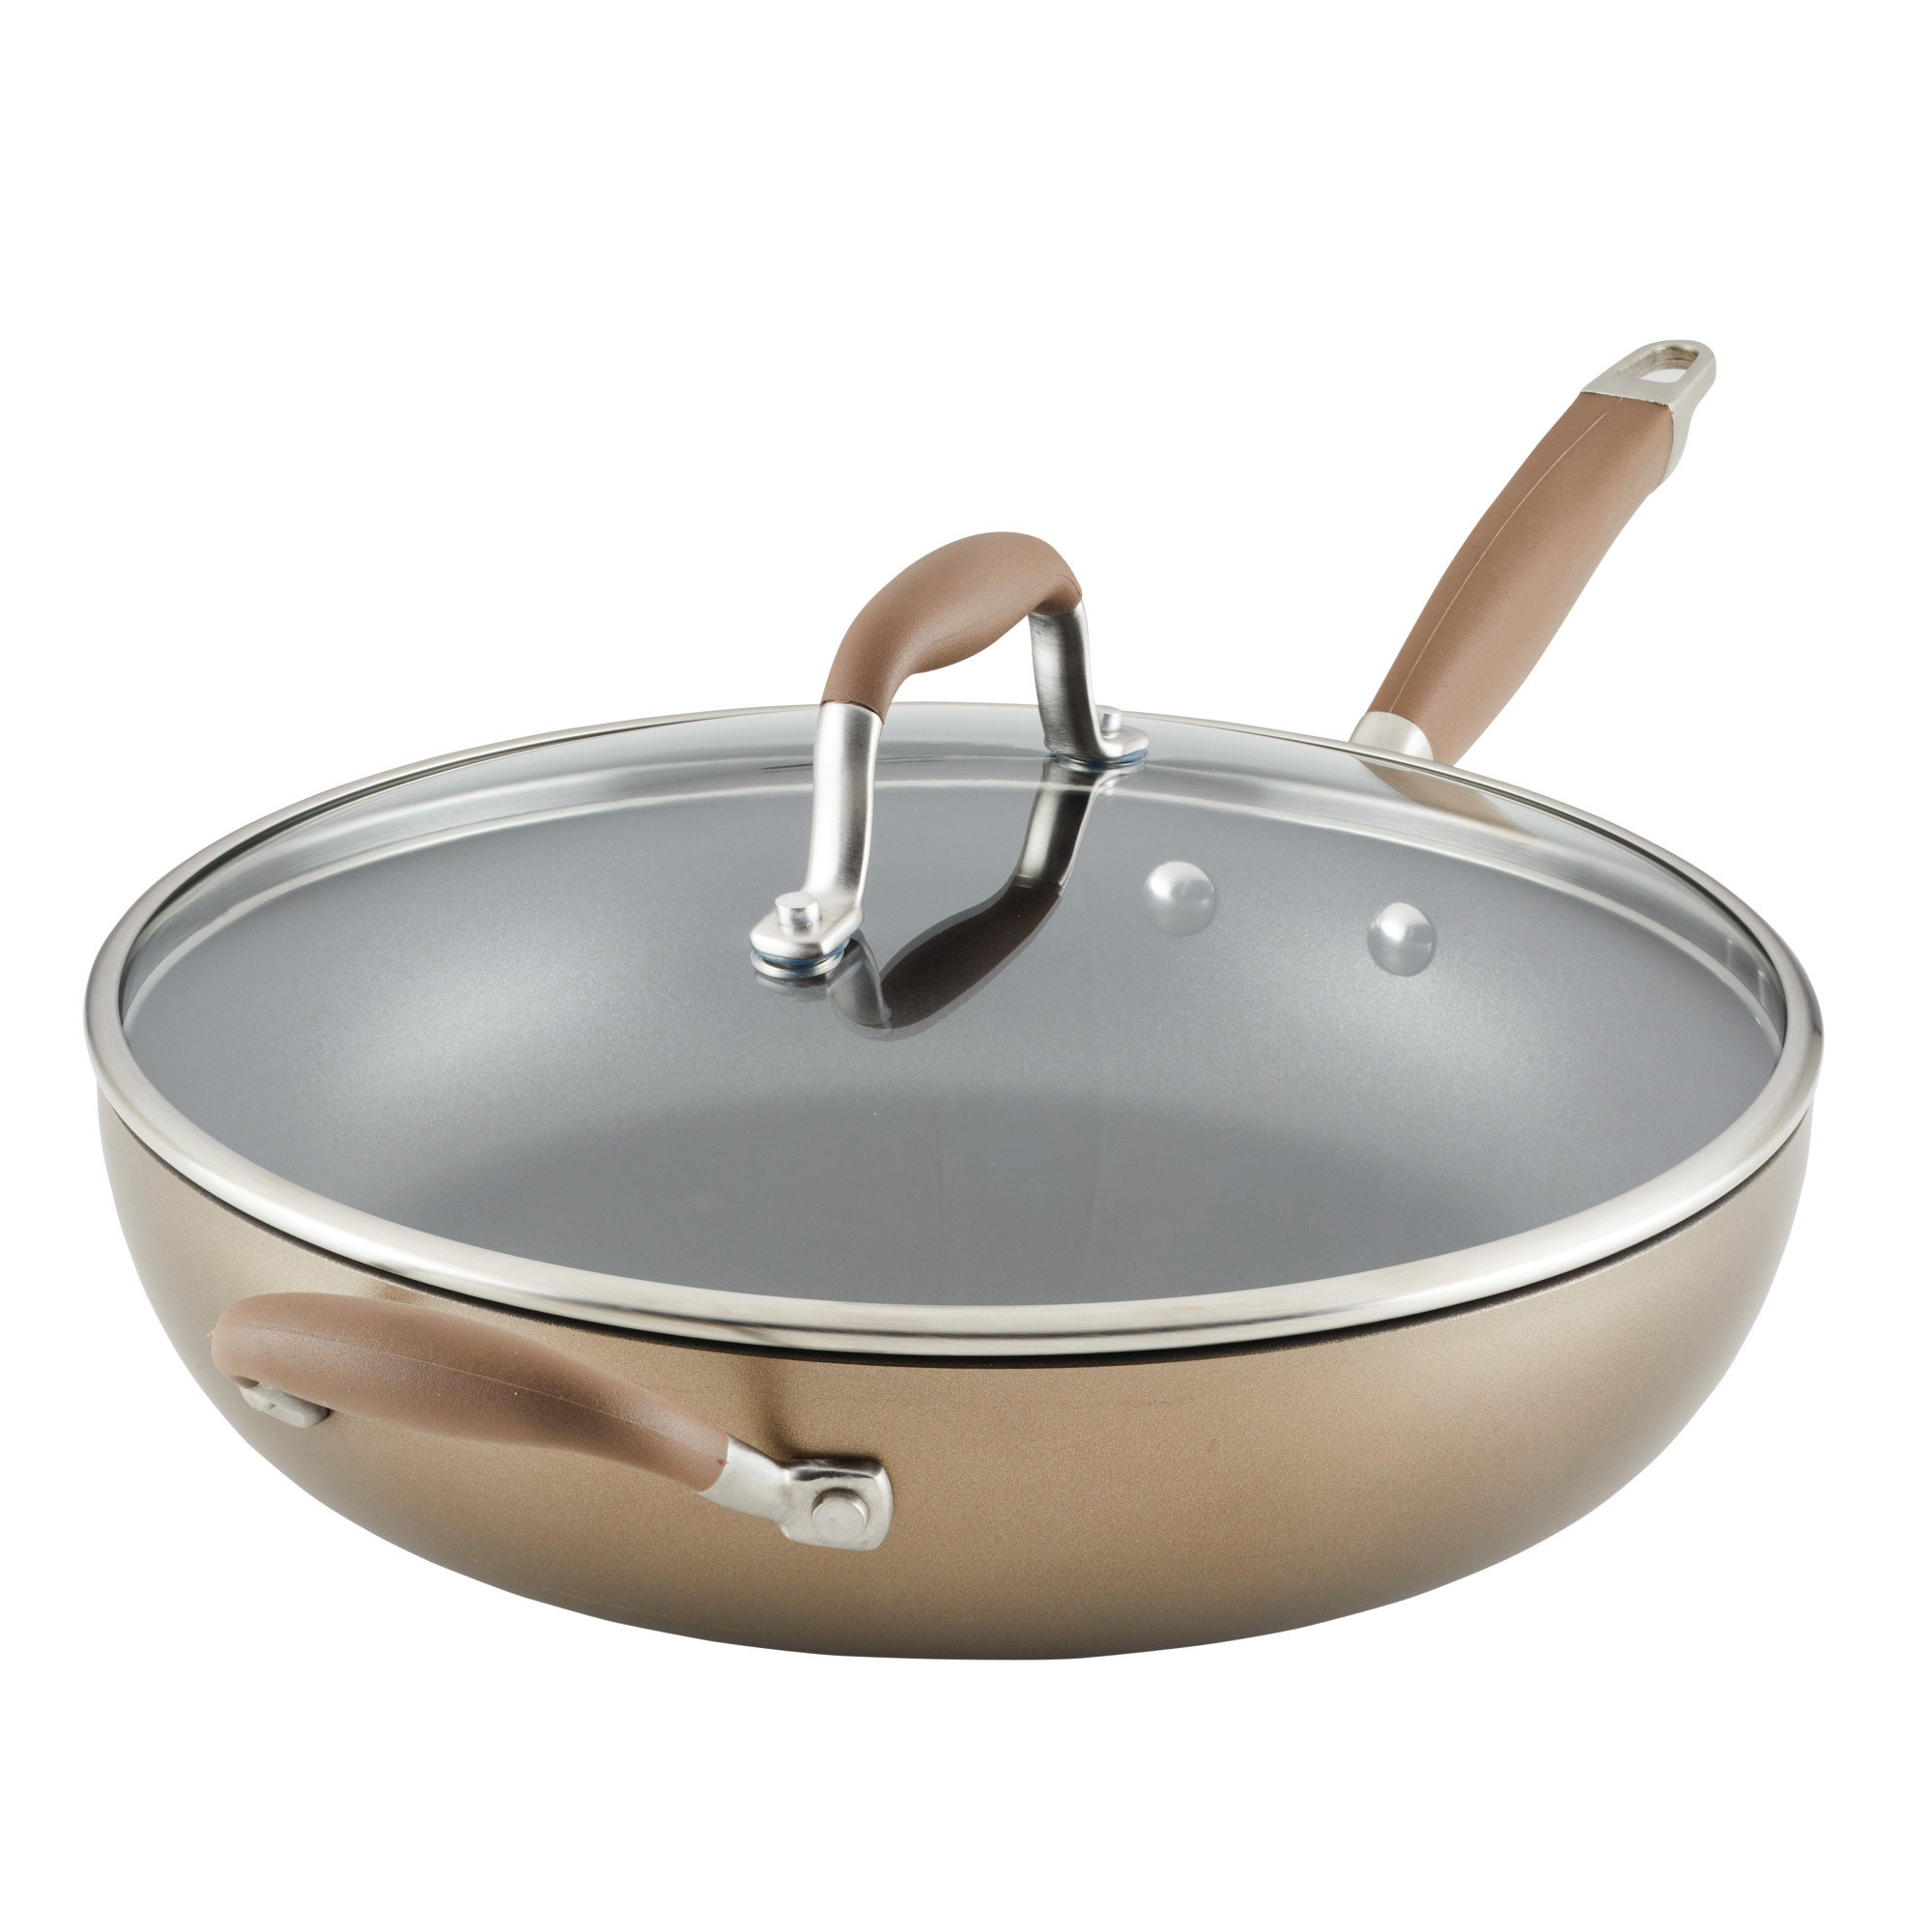 Anolon Advanced Home Hard-Anodized Nonstick 8.5-In. Skillet